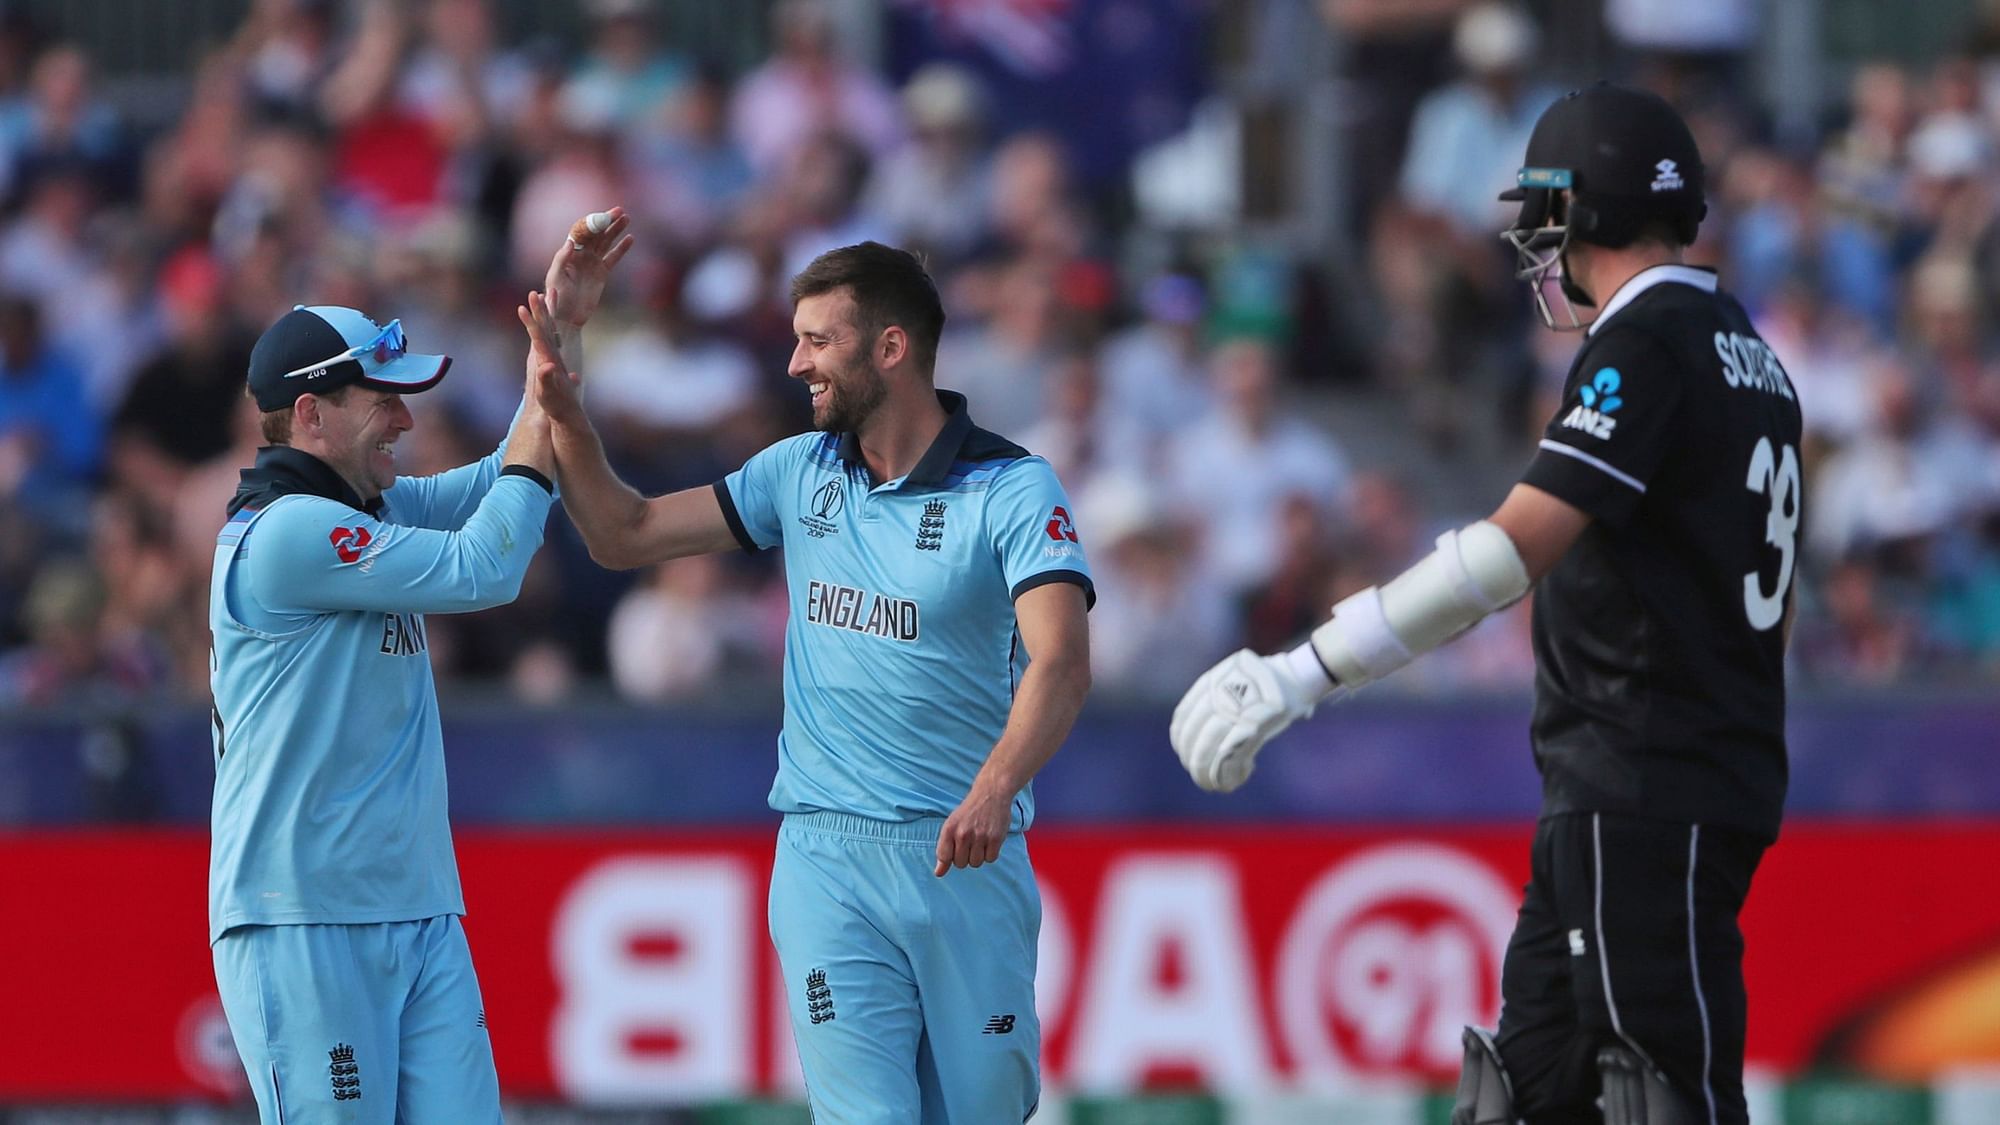  Watch video highlights of England’s 119-run victory over New Zealand in the 2019 ICC World Cup.